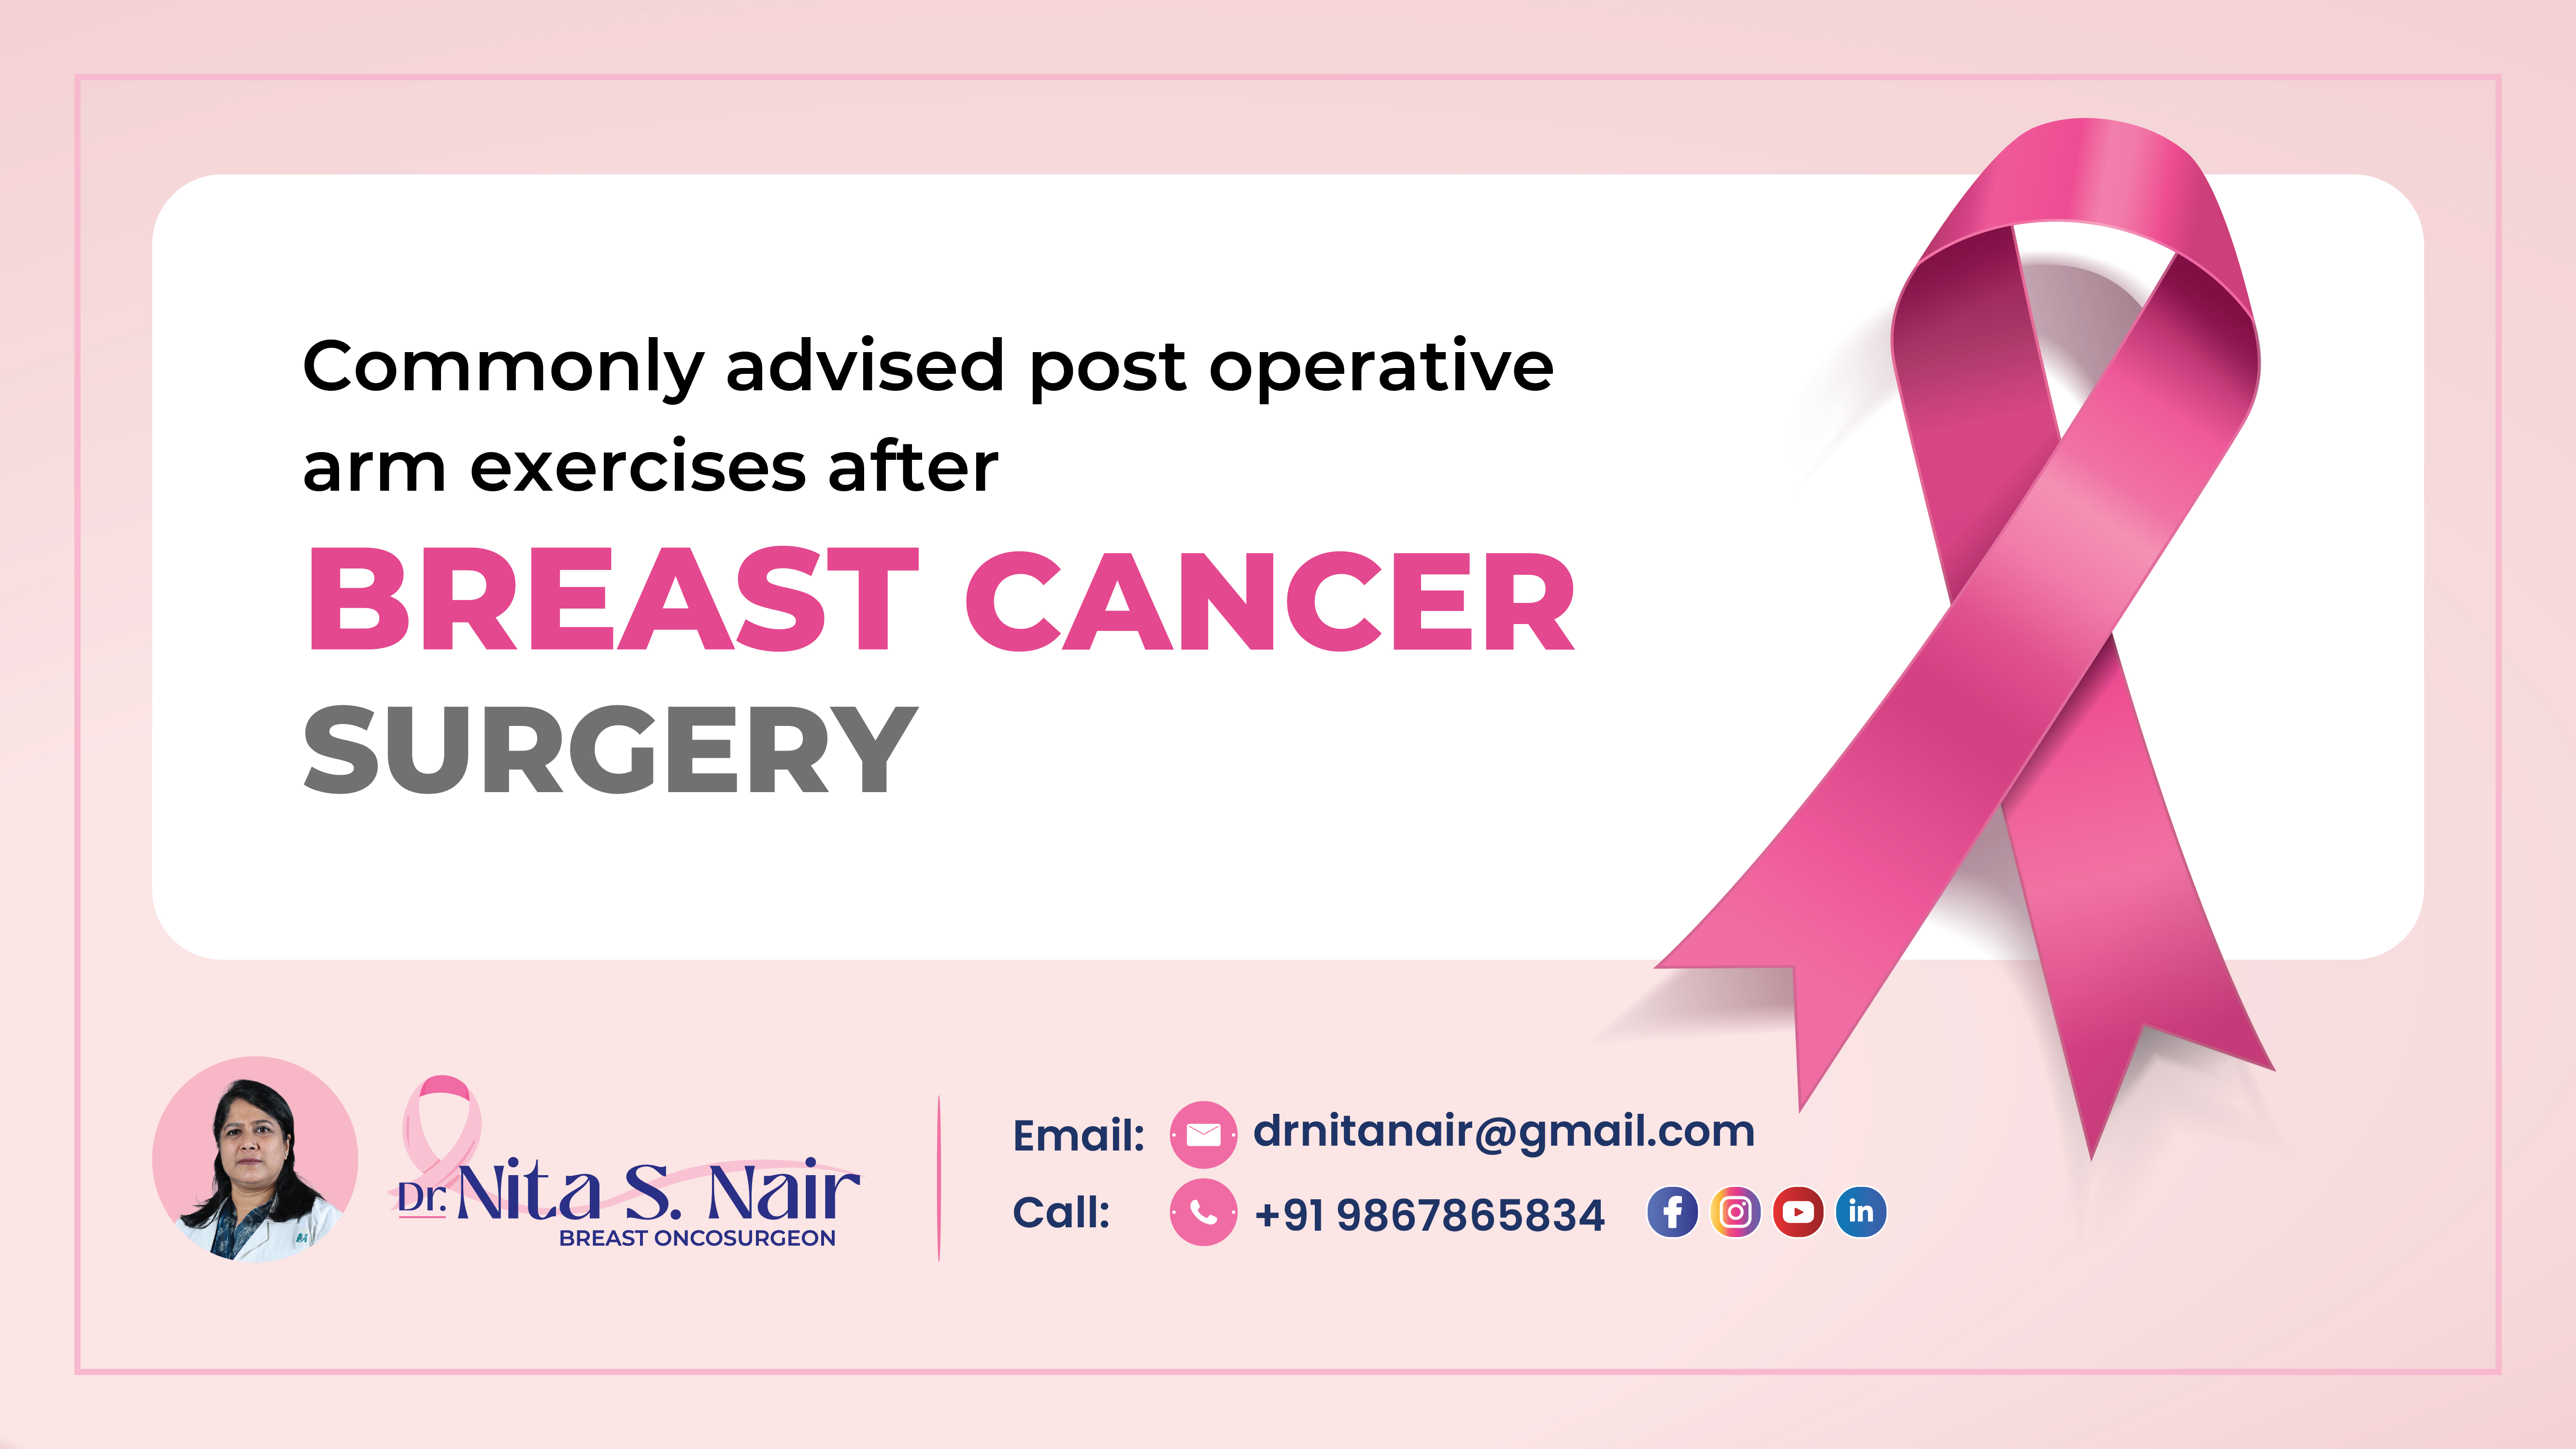 Commonly advised post operative arm exercises after Breast Cancer Surgery